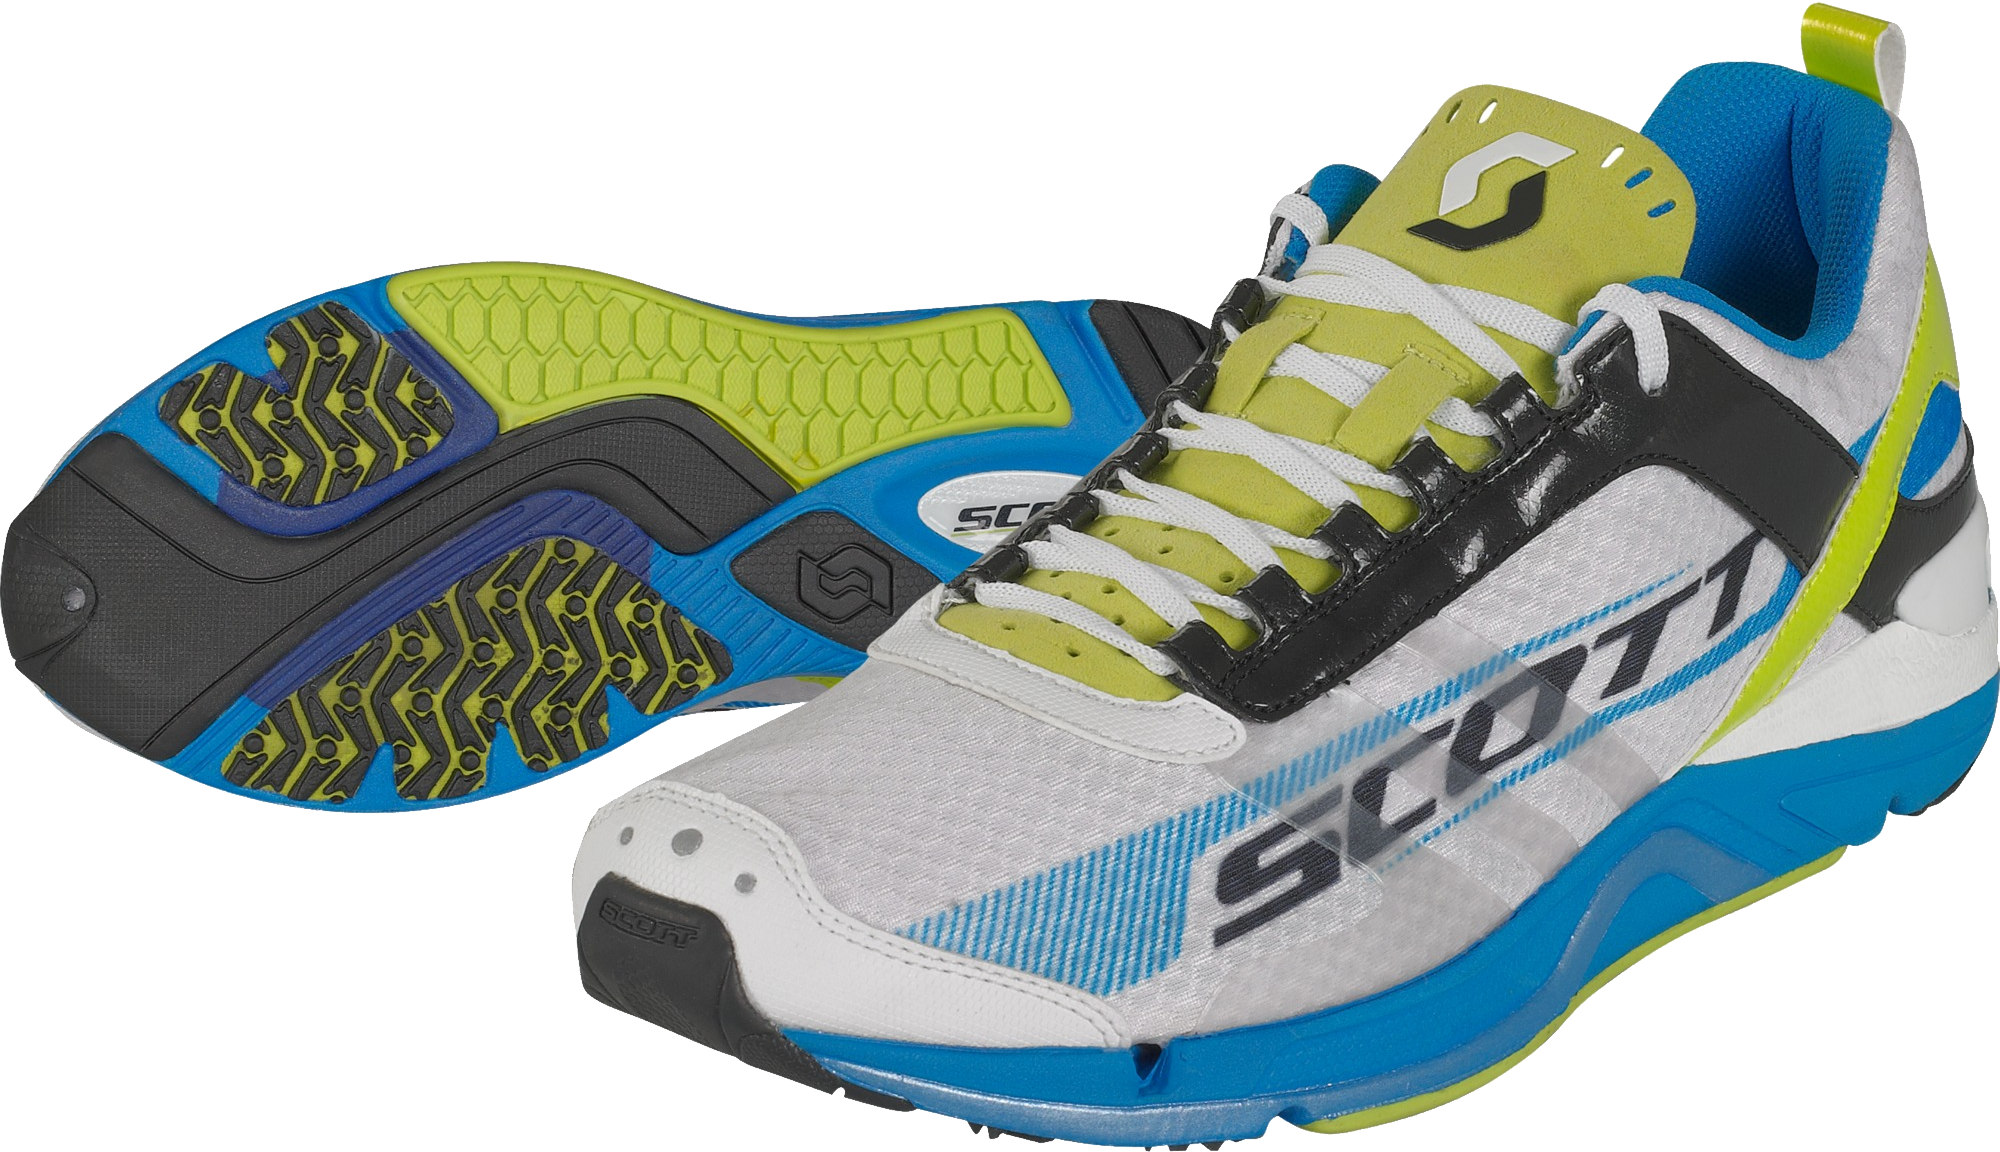 Running shoes PNG free images download.